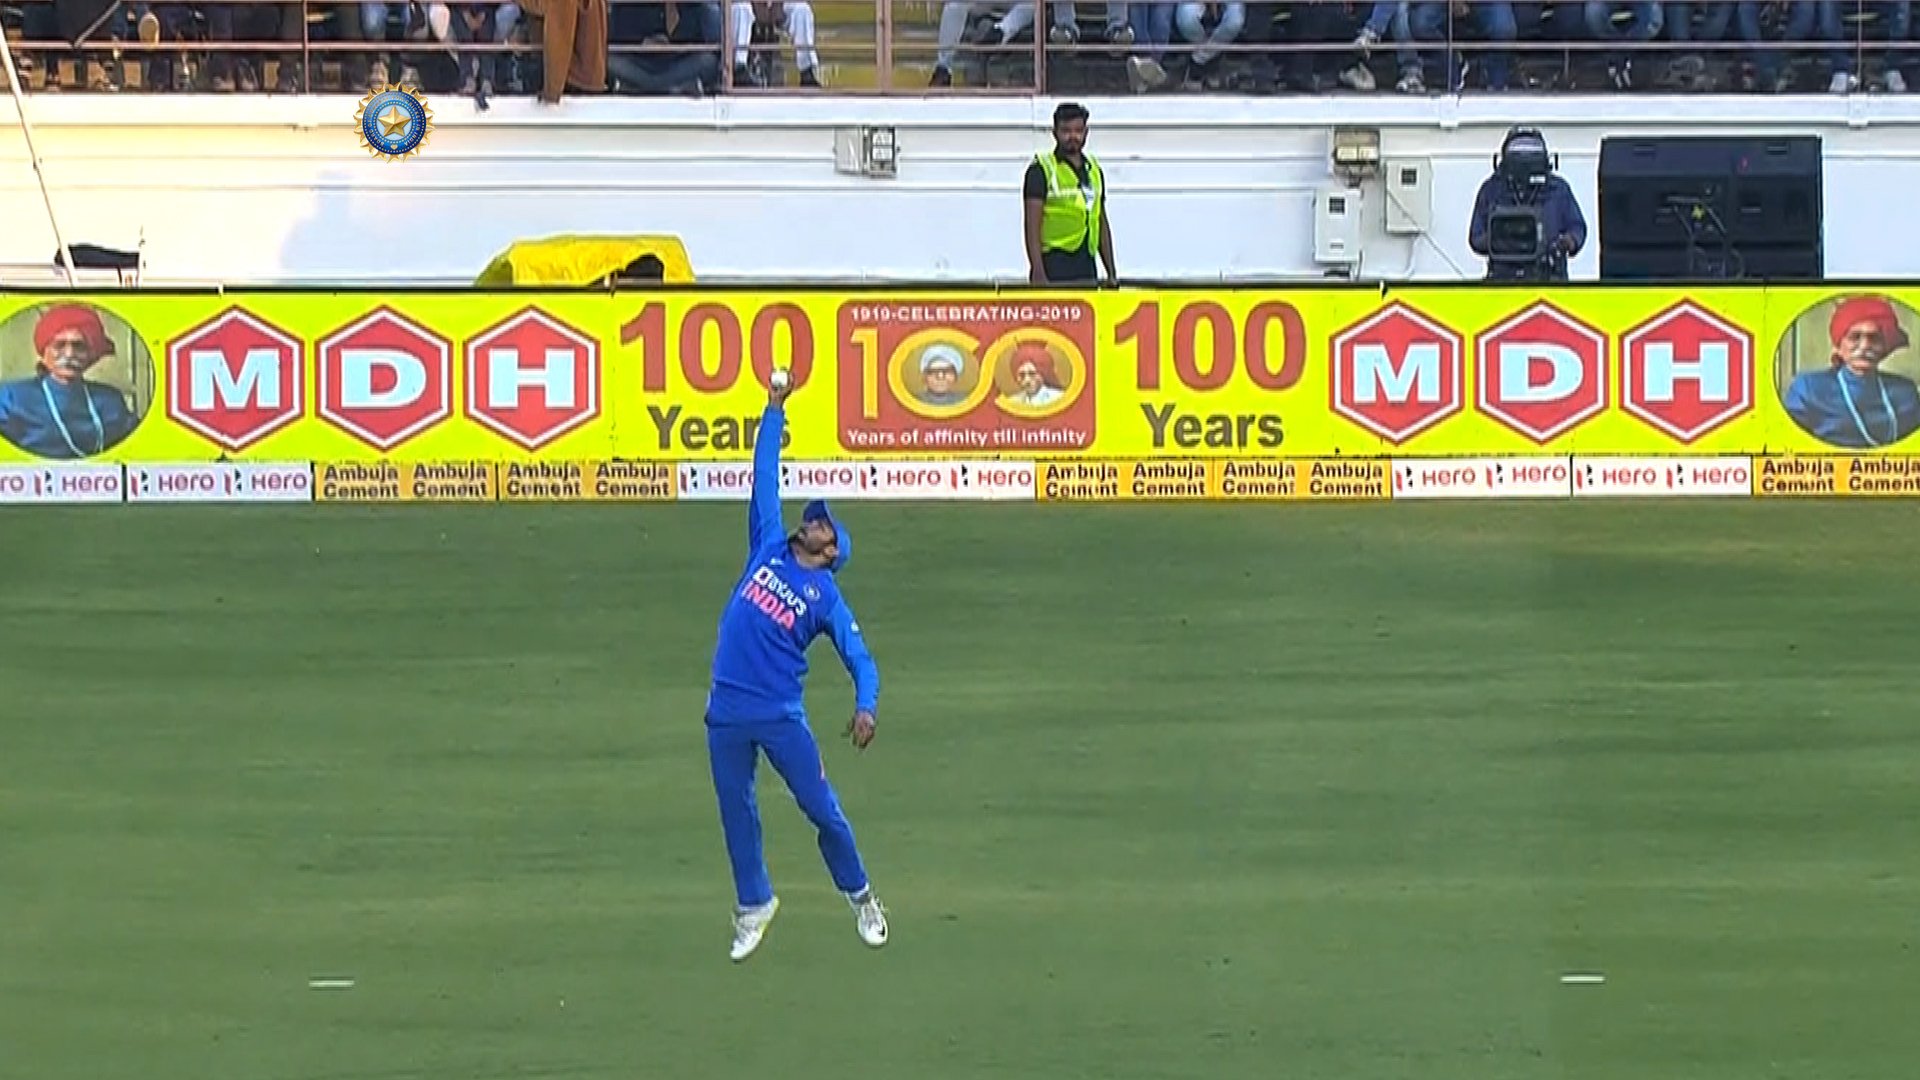 Manish Pandey takes catch